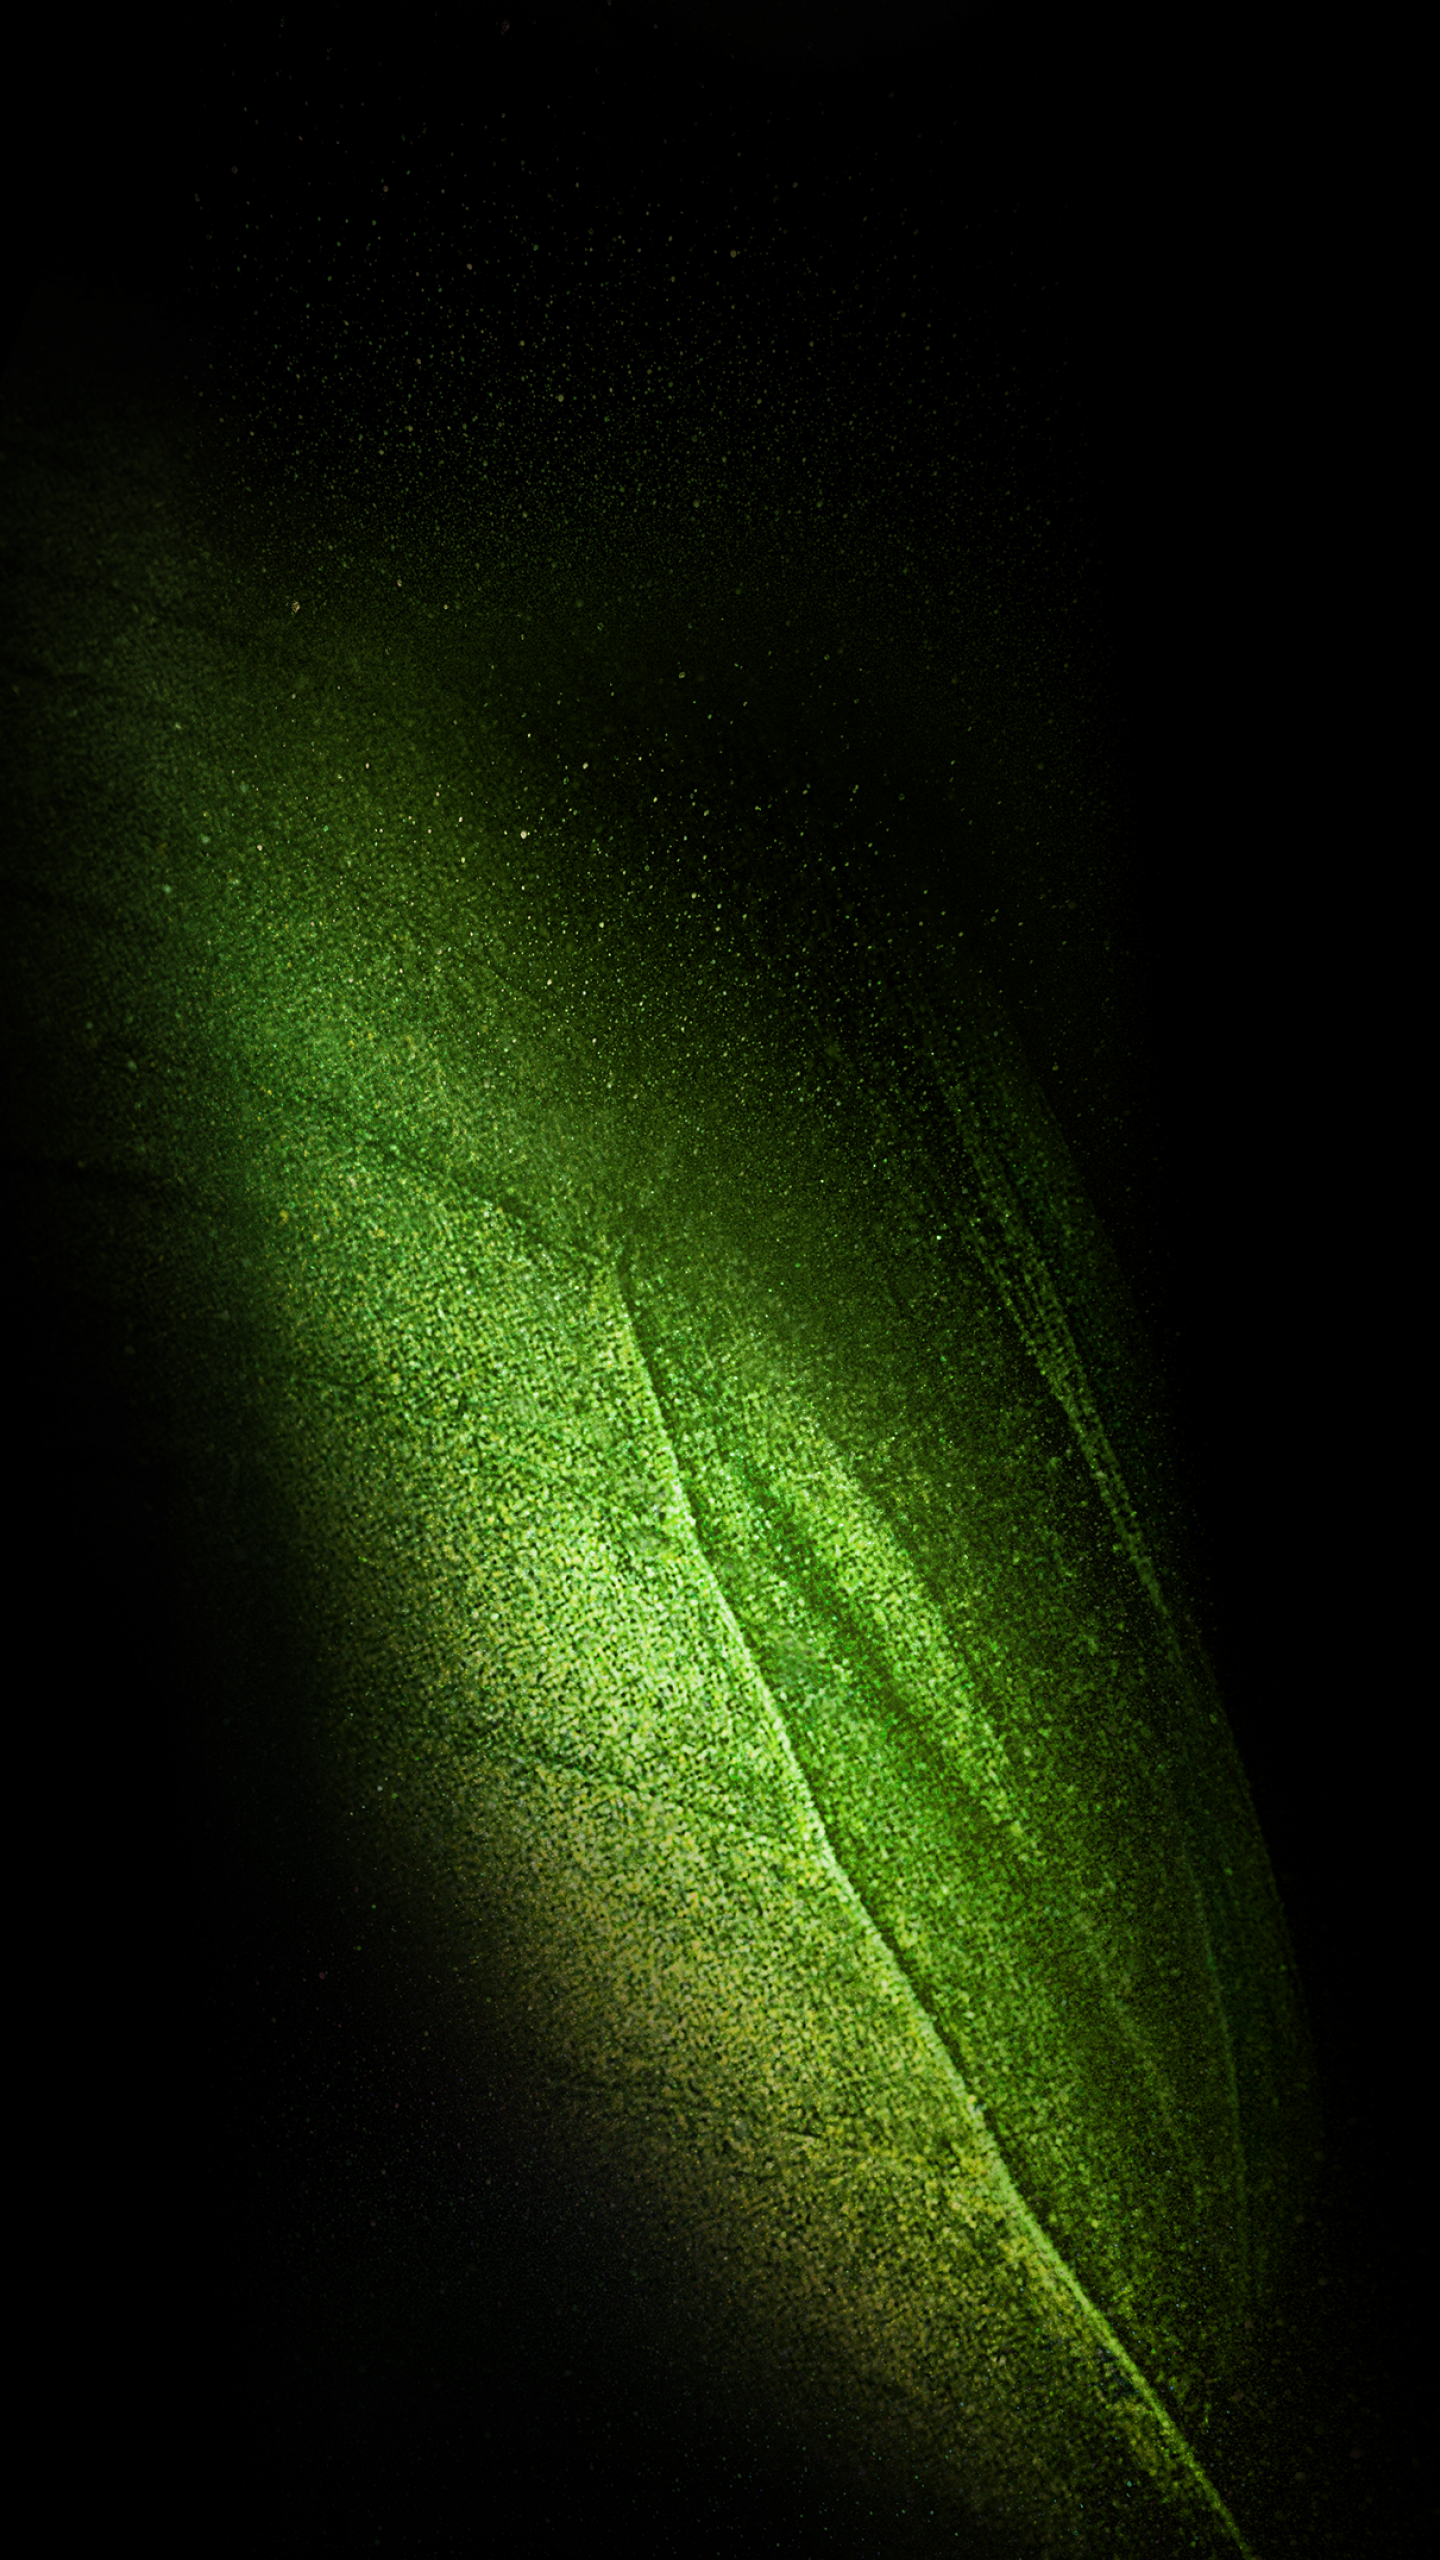 Wallpaper Samsung Galaxy Fold, Leaf, Green, Stock, 4K, Black Dark,. Wallpaper For IPhone, Android, Mobile And Desktop